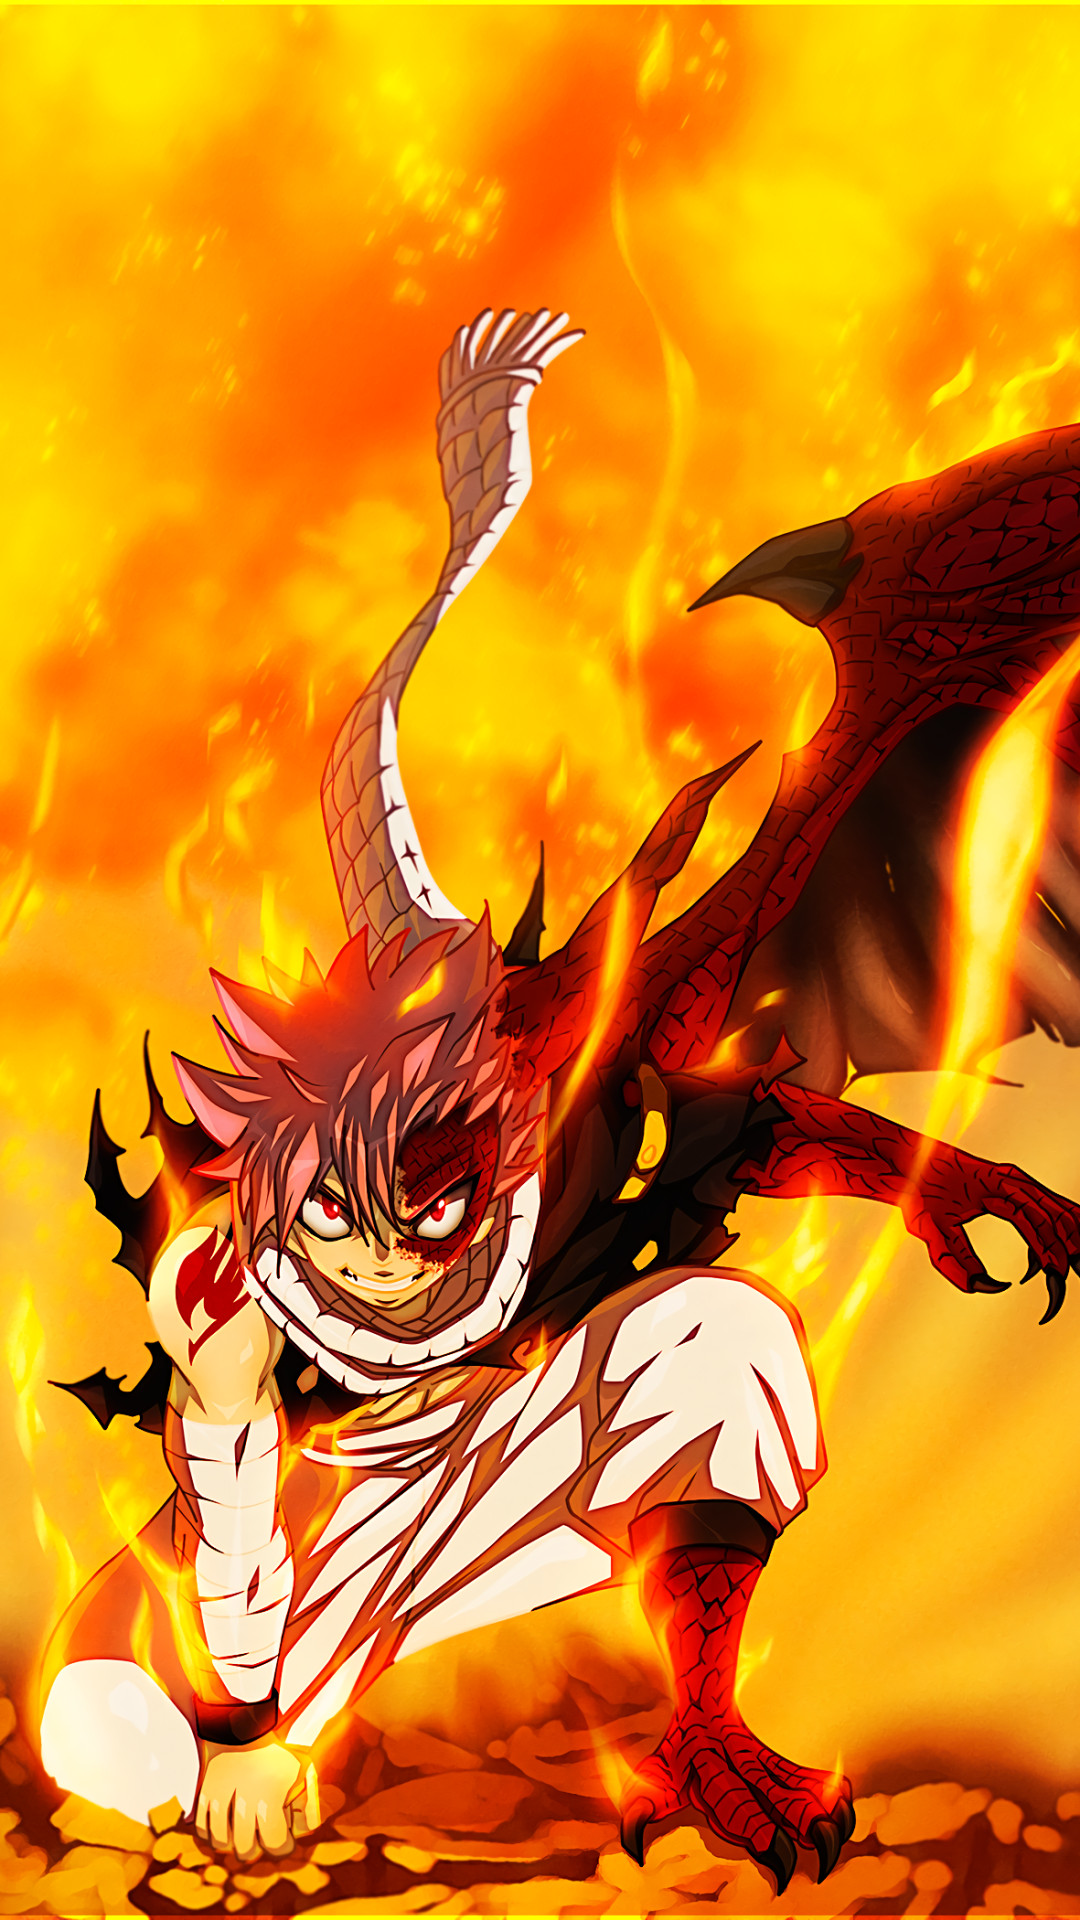 Fairy Tail Anime Iphone Wallpapers Iphone Wallpapers